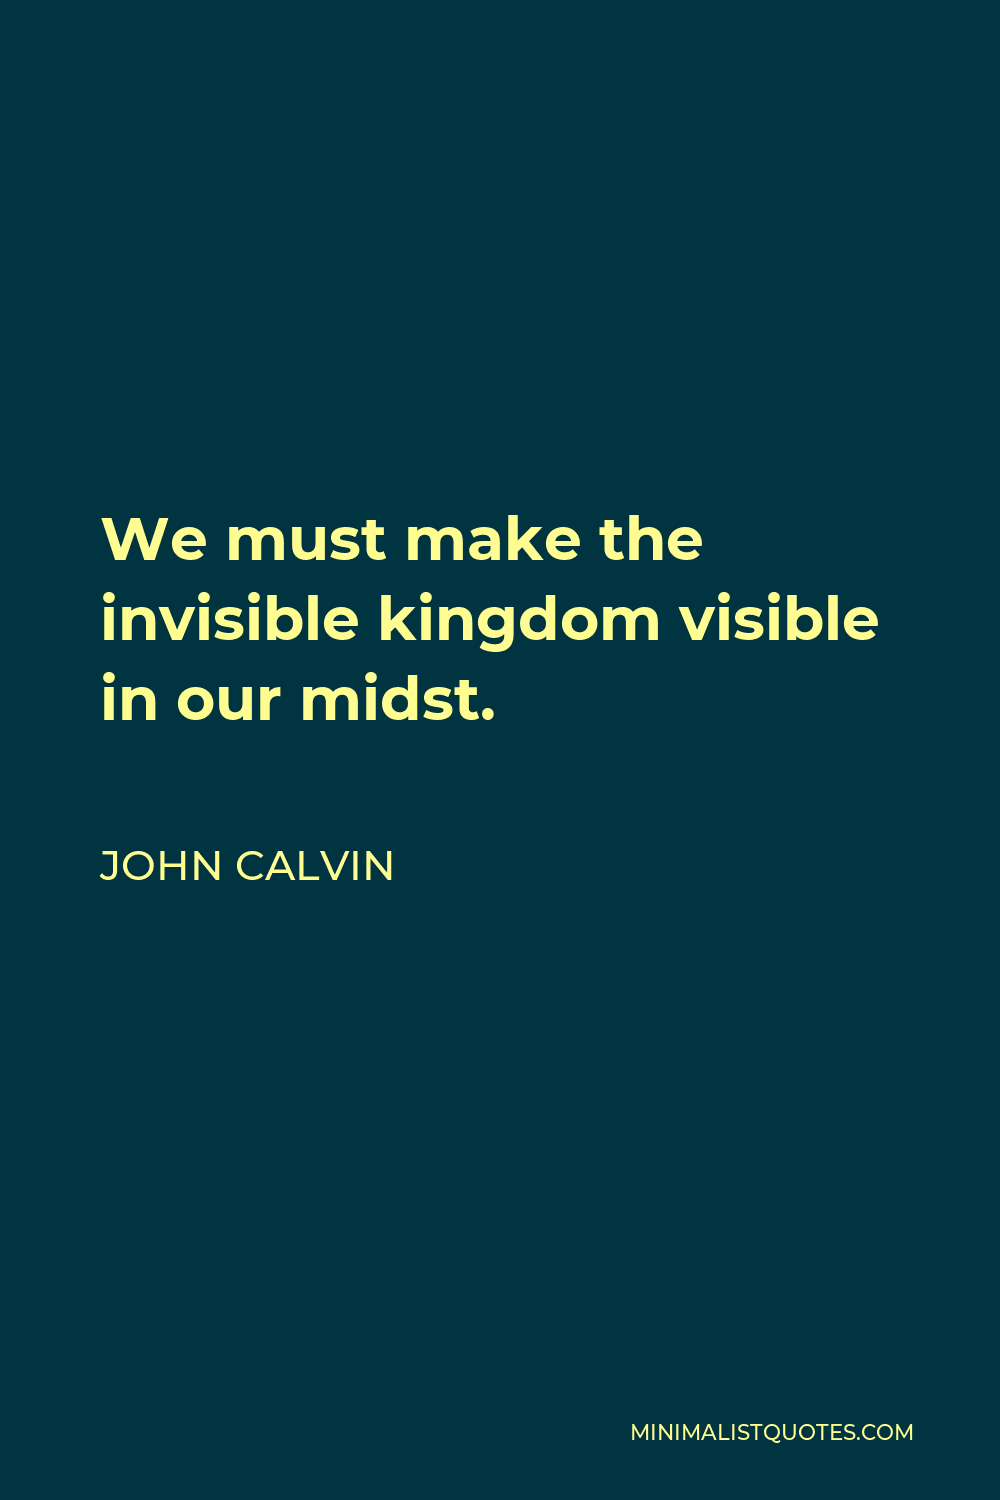 John Calvin Quote - We must make the invisible kingdom visible in our midst.